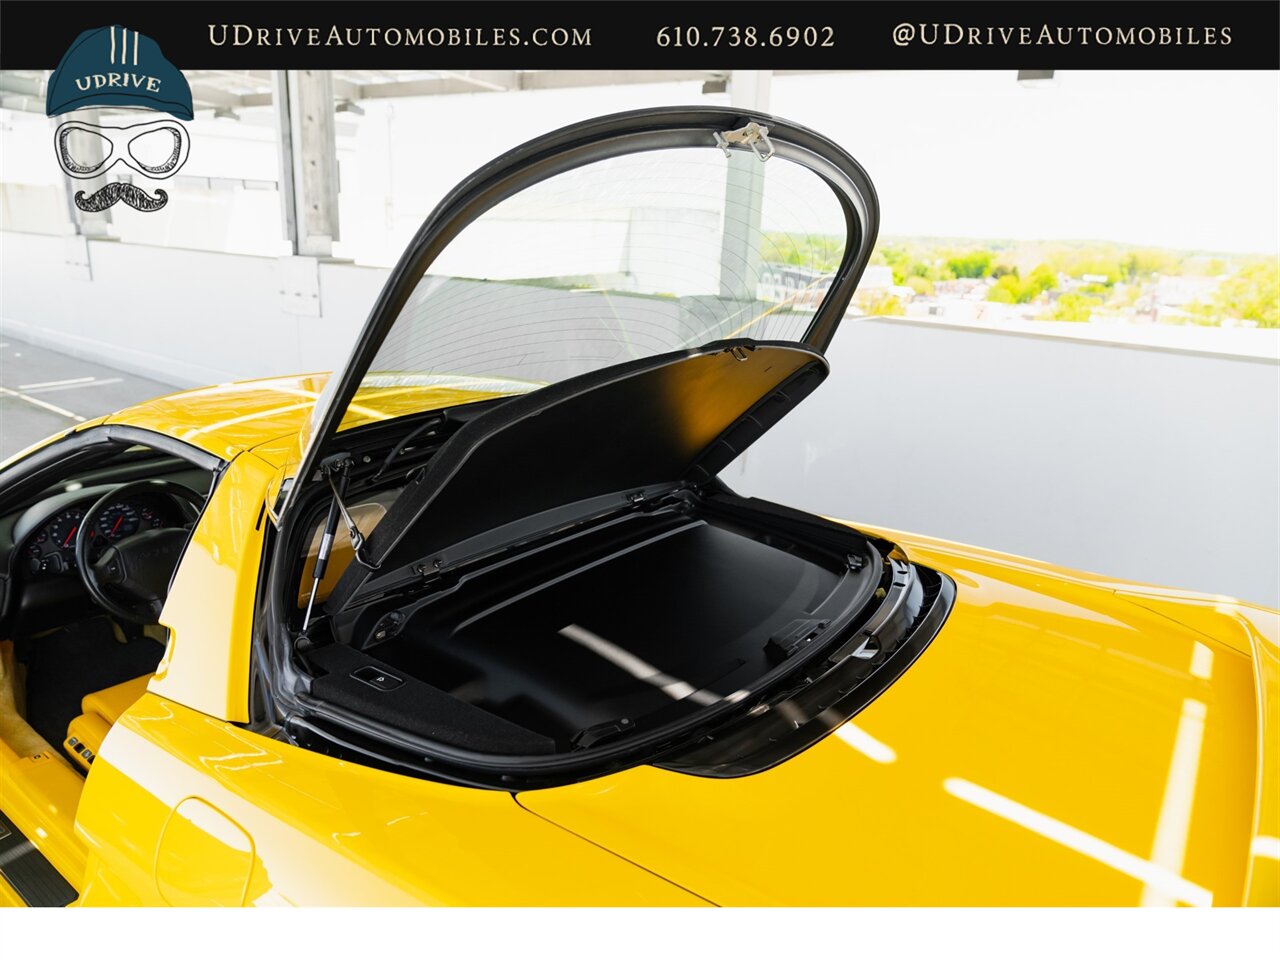 2003 Acura NSX NSX-T  Spa Yellow over Yellow Lthr 1 of 13 Produced - Photo 43 - West Chester, PA 19382